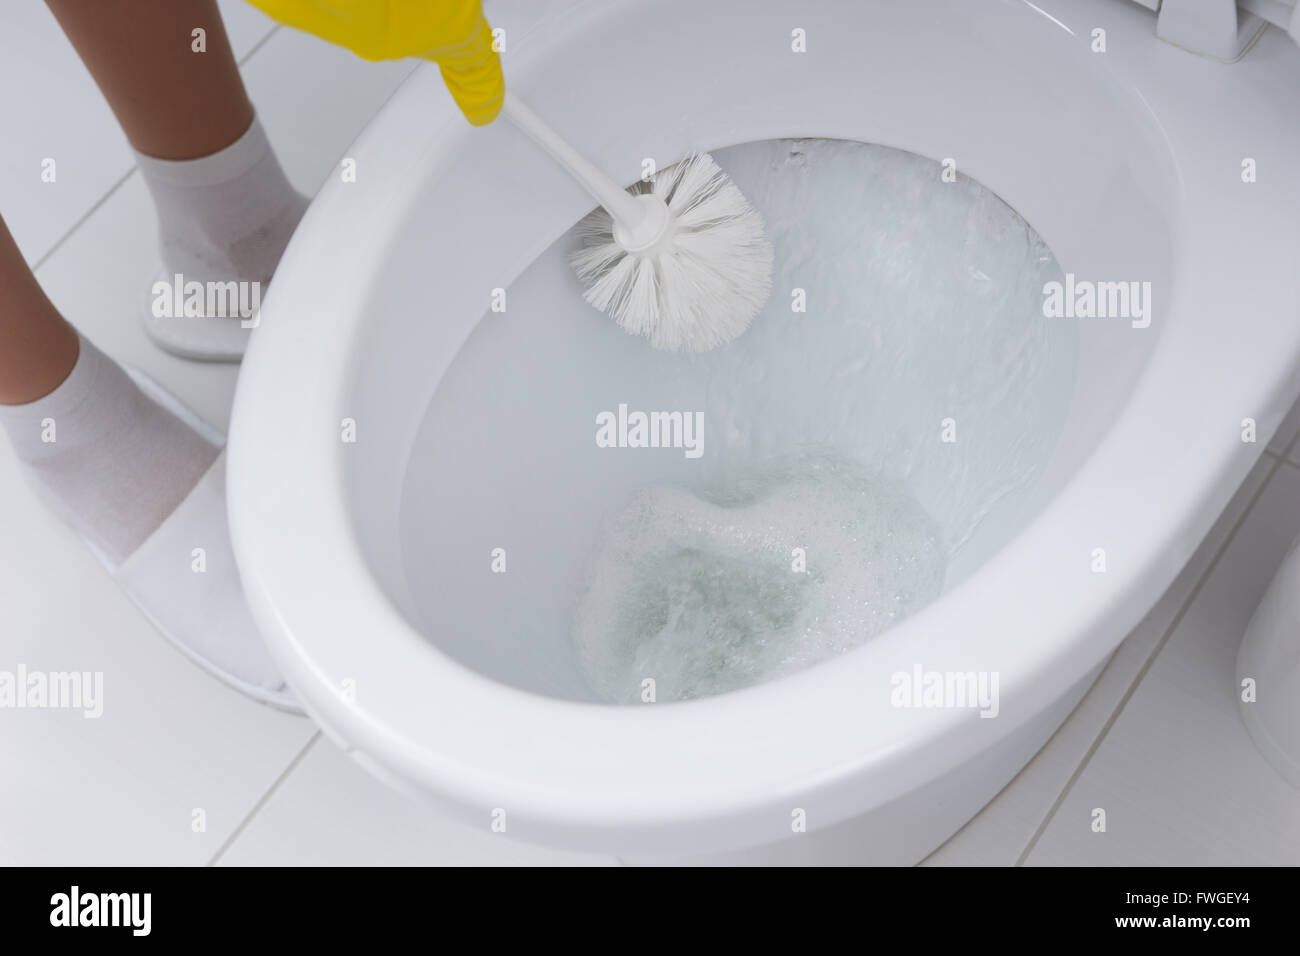 Housewife cleaning out the bowl of the toilet scrubbing under the rim with an antibacterial detergent and brush, close up of her hand. Stock Photo